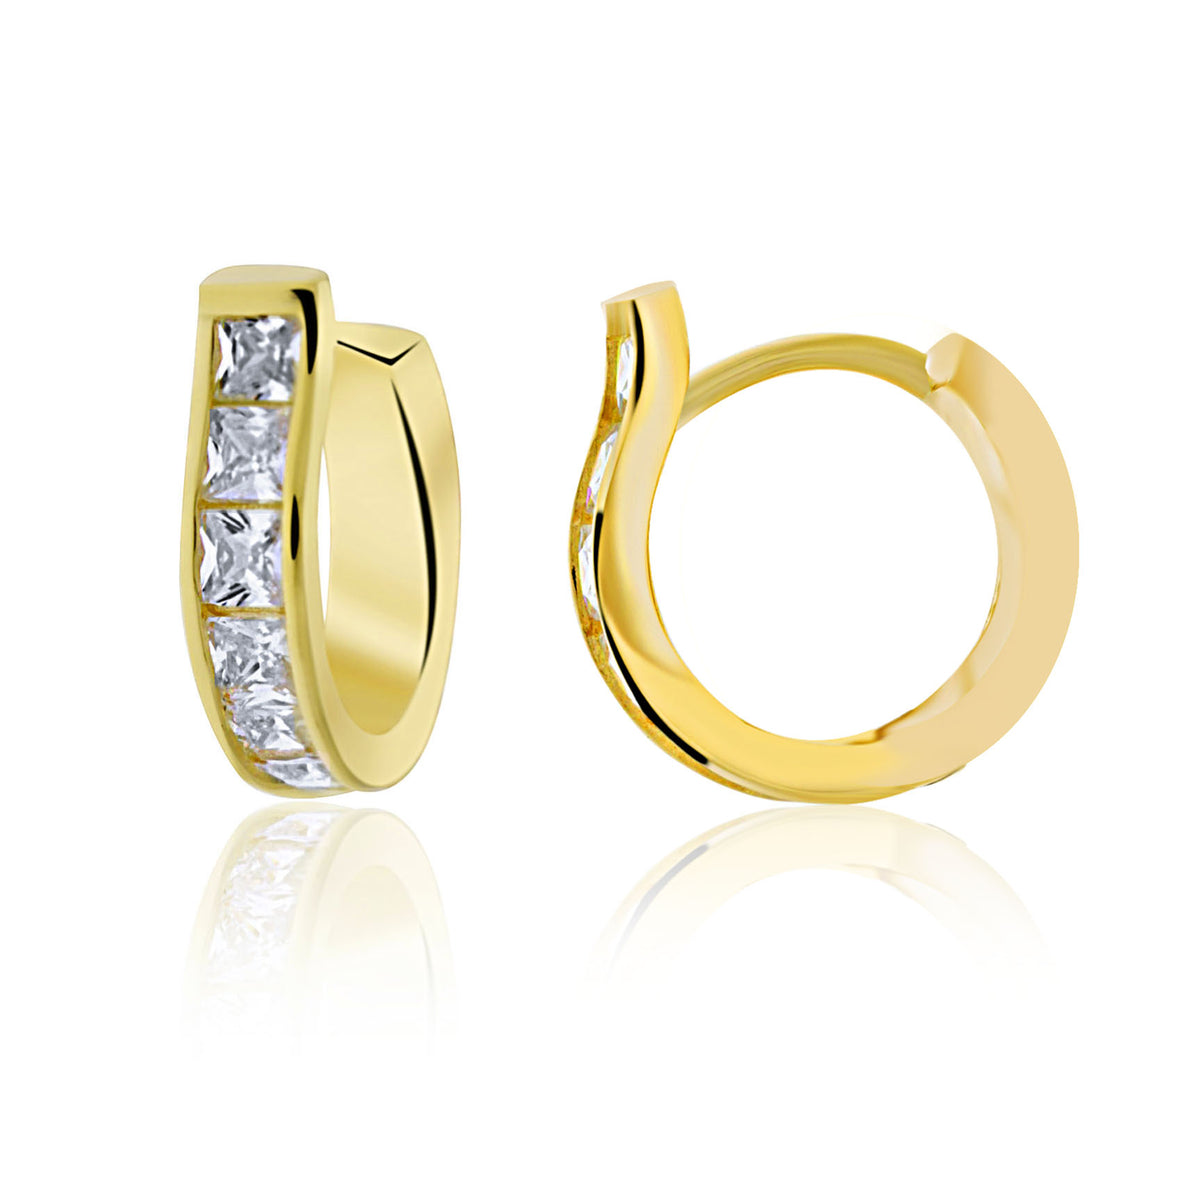 Yellow Gold Plated Channel Set Cz Huggie Earrings